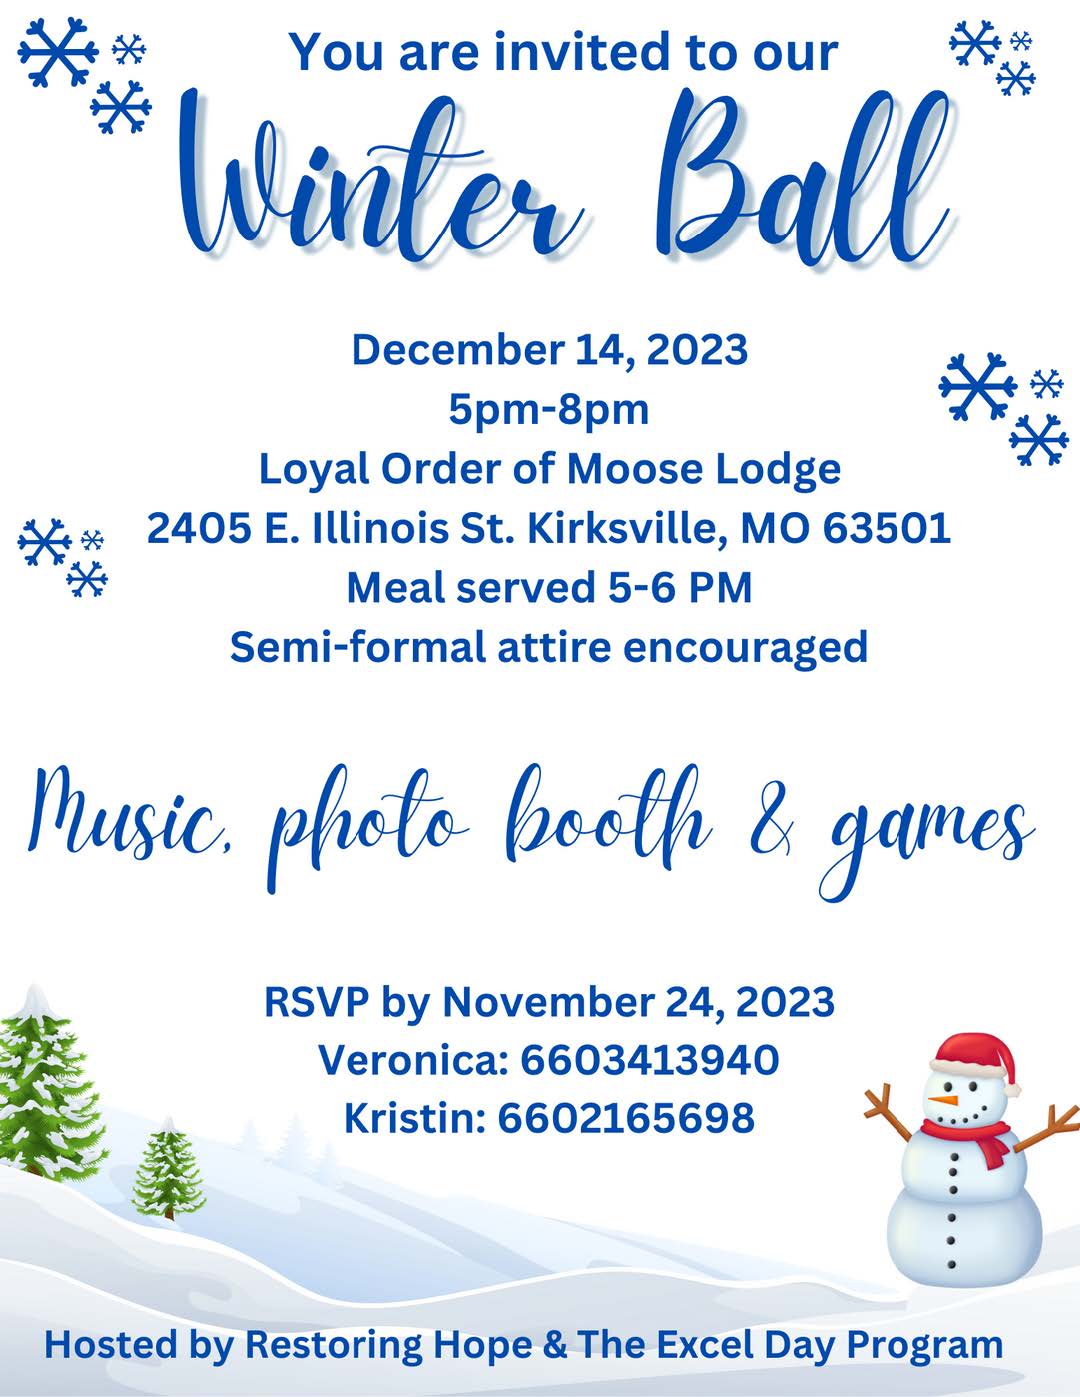 Check more about Winter Ball